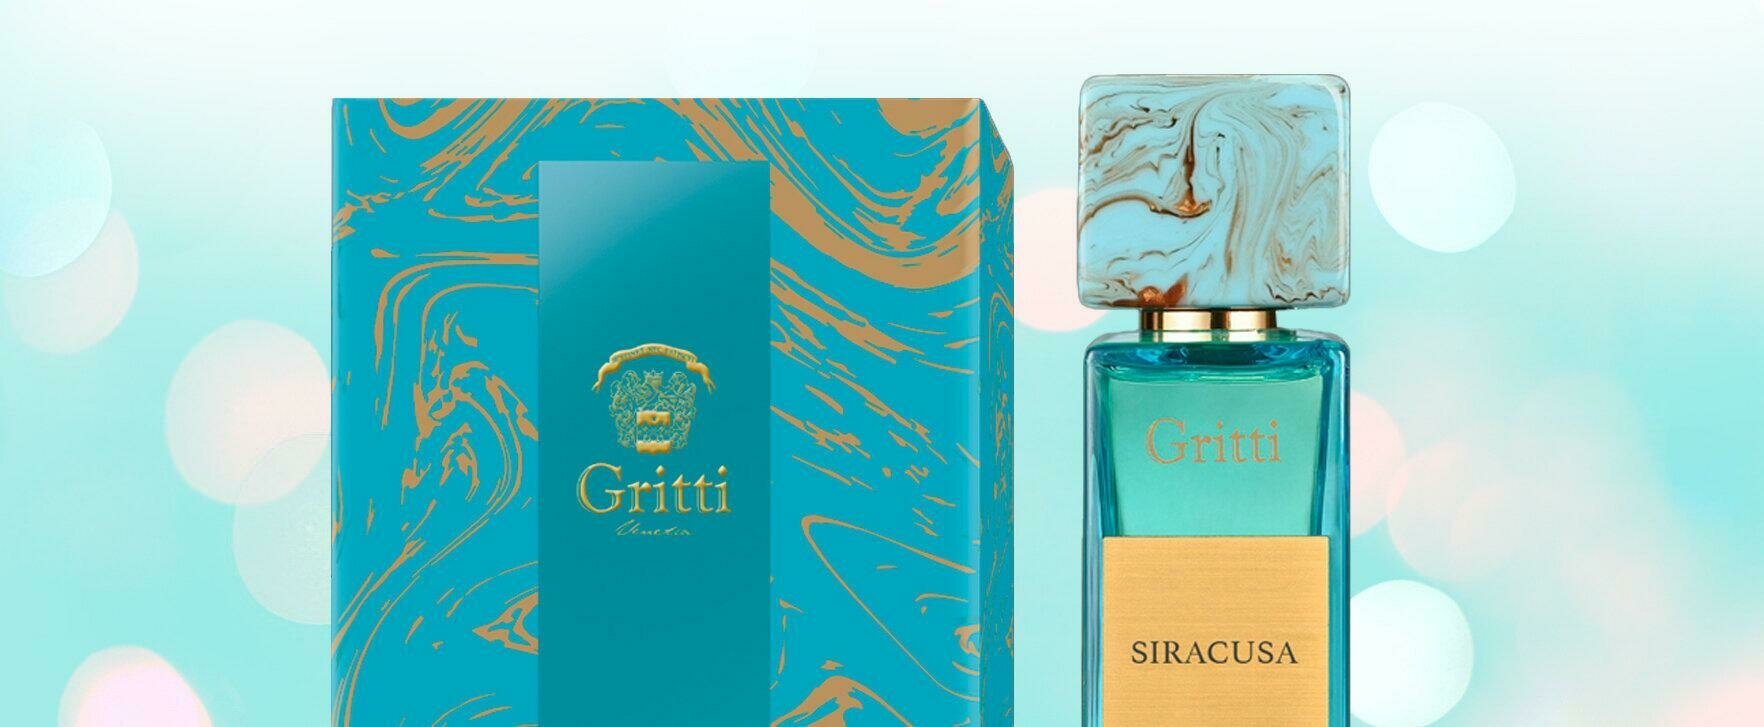 The New Unisex Fragrance "Siracusa": An Ode to the Beauty of the Italian Summer